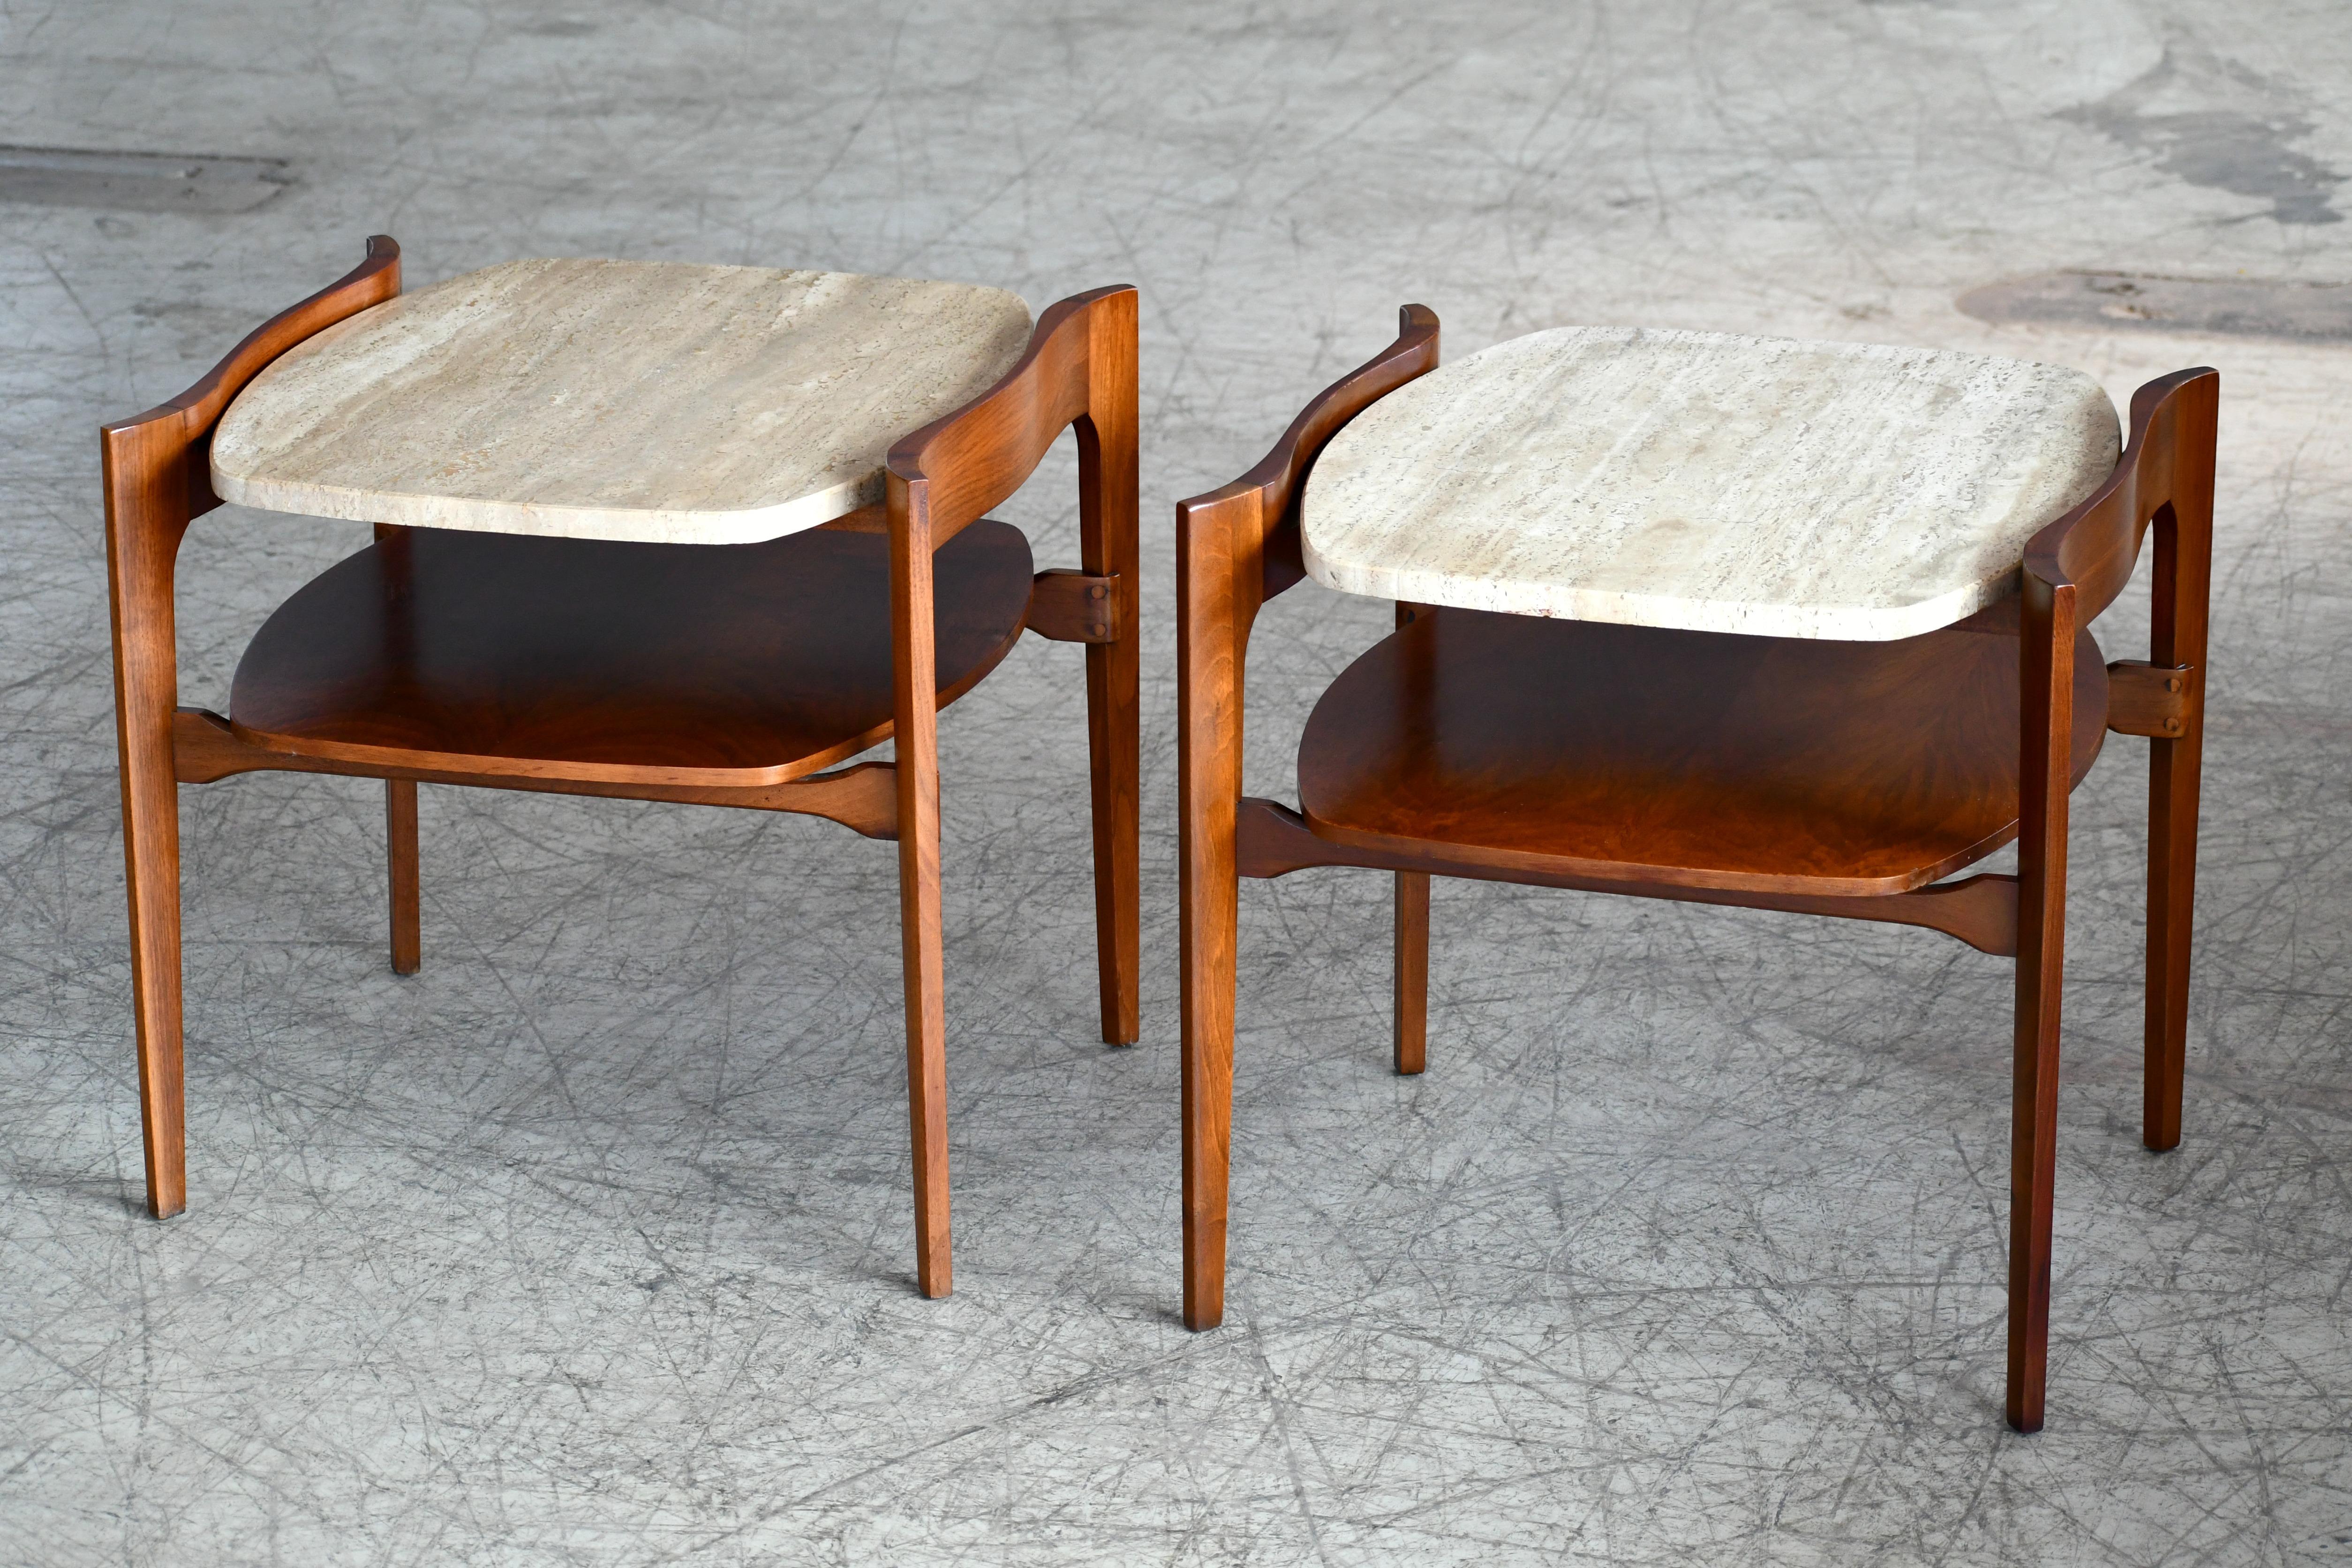 Mid-Century Modern Bertha Schaefer Midcentury End or Side Tables in Walnut with Travertine Tops